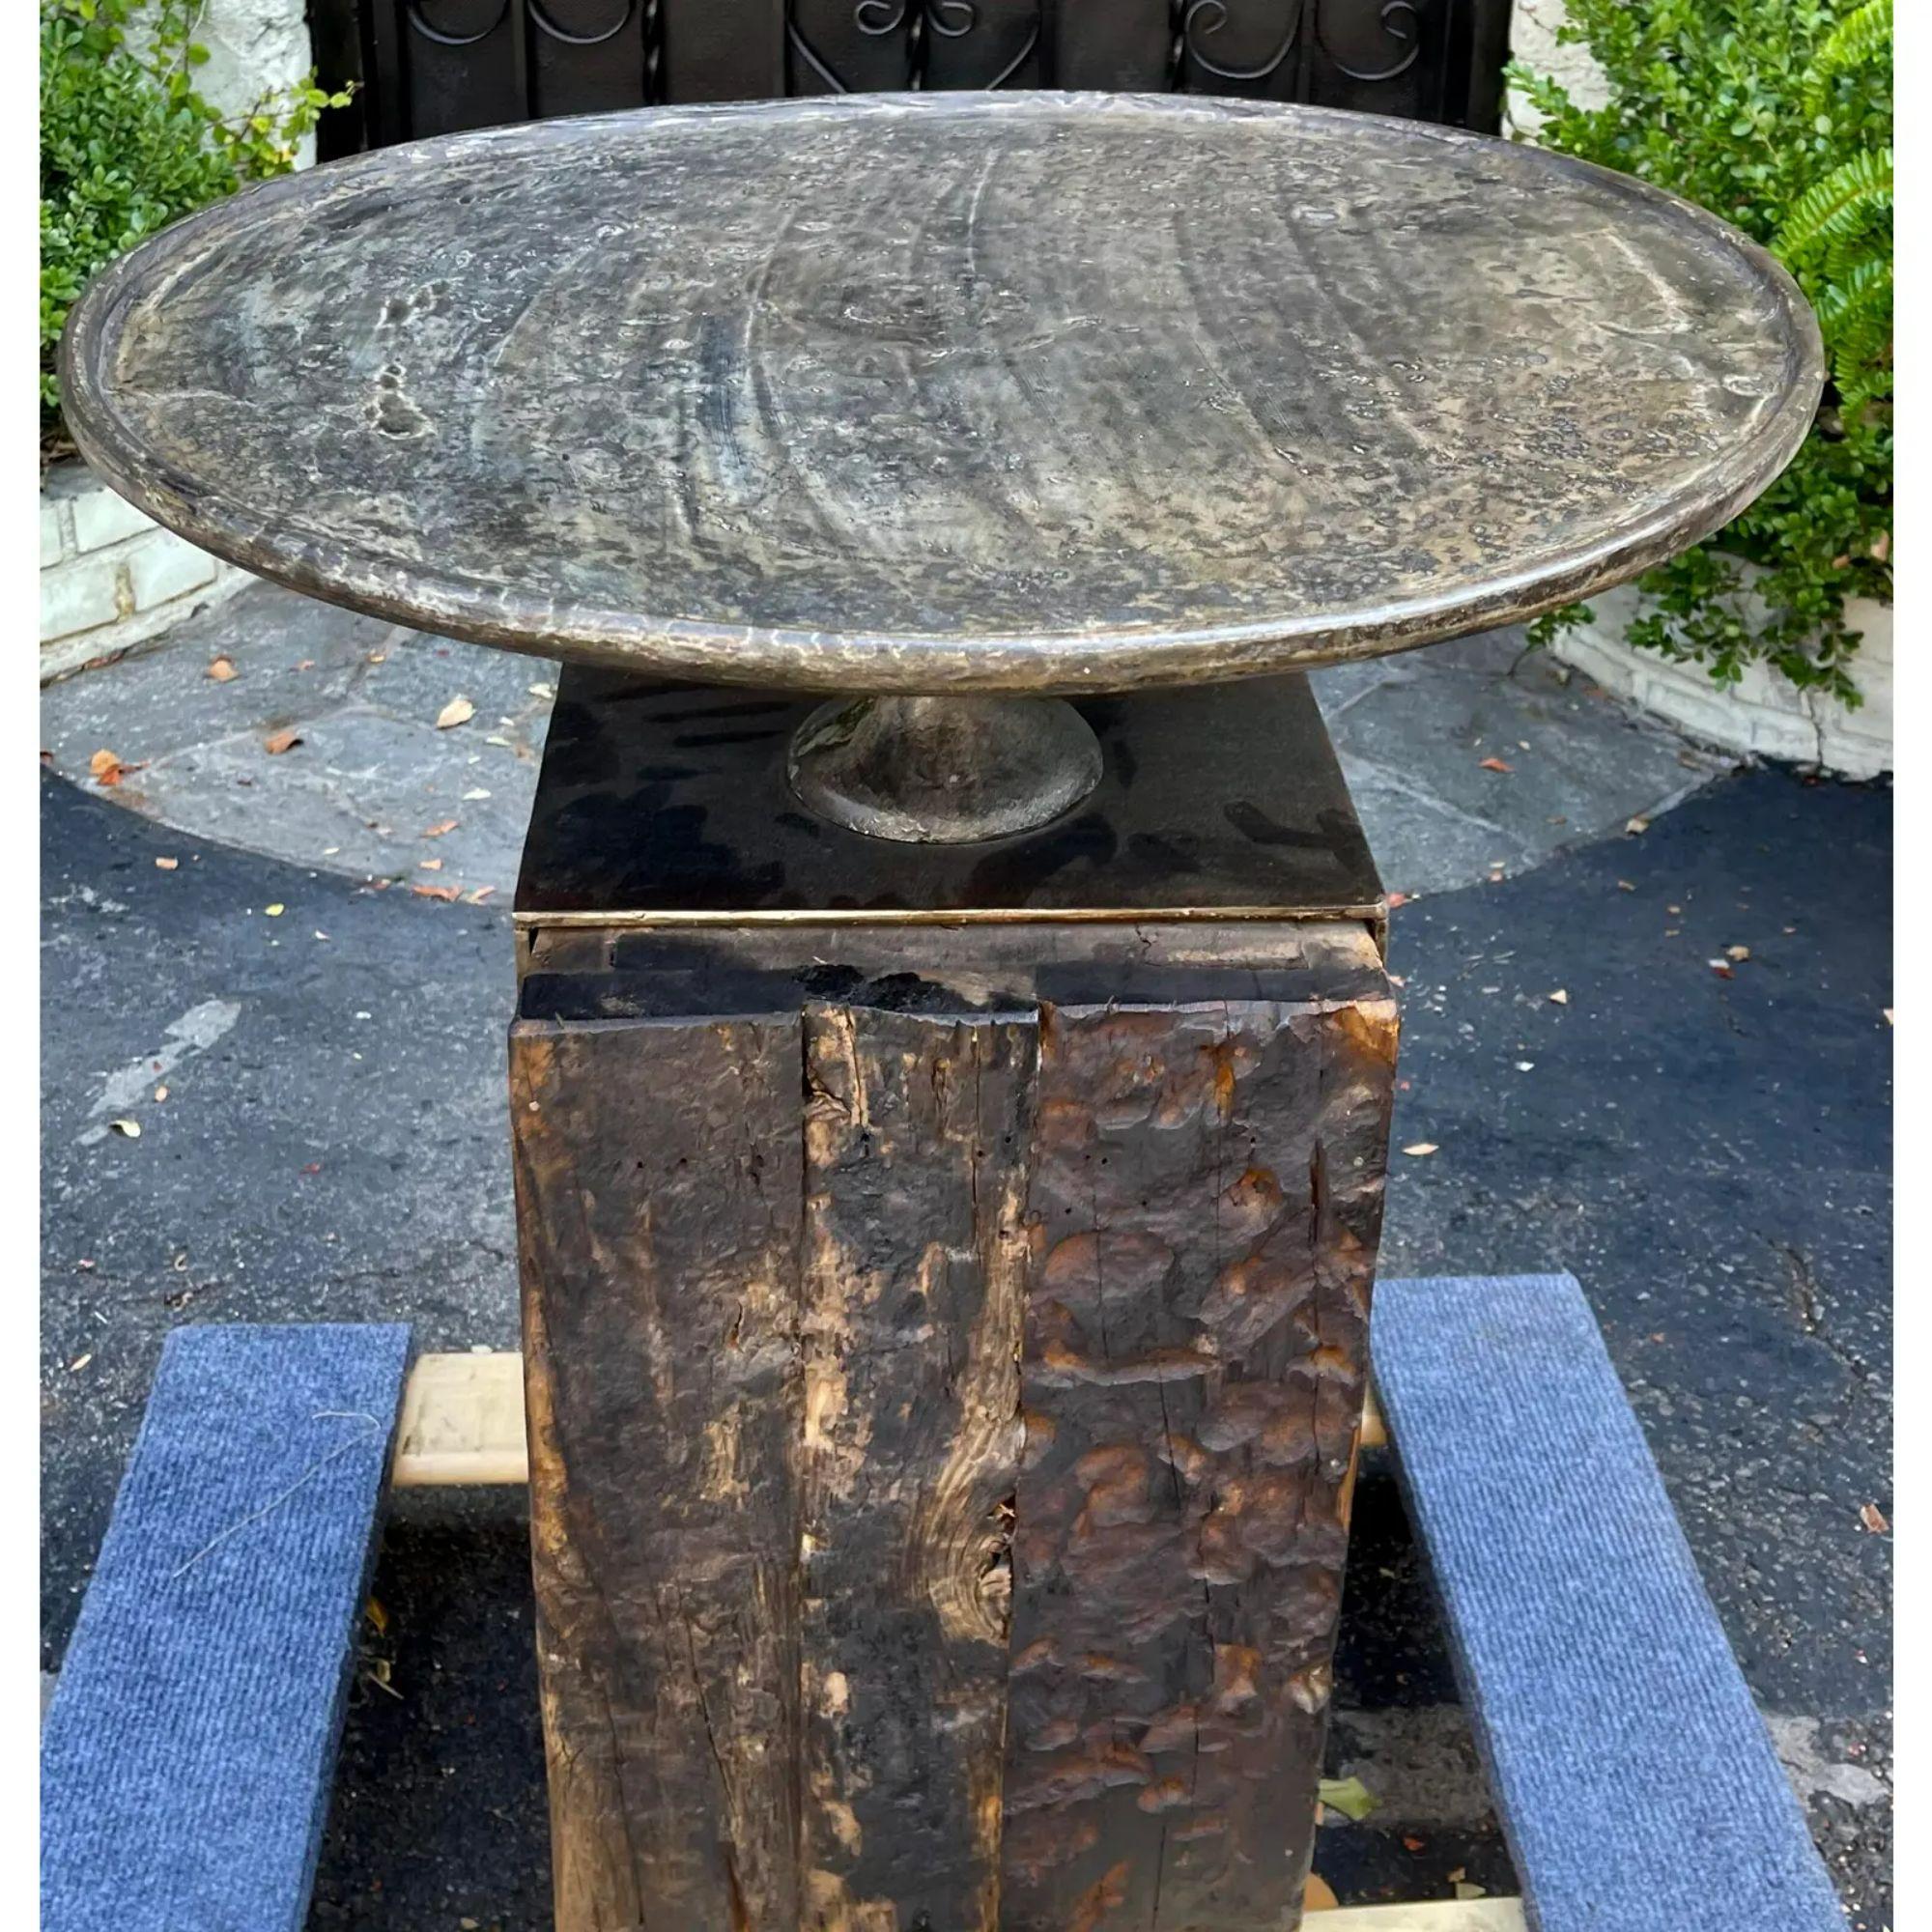 Contemporary Modern Arteriors Industrial Chic Pounded Iron & Railroad Tie Table